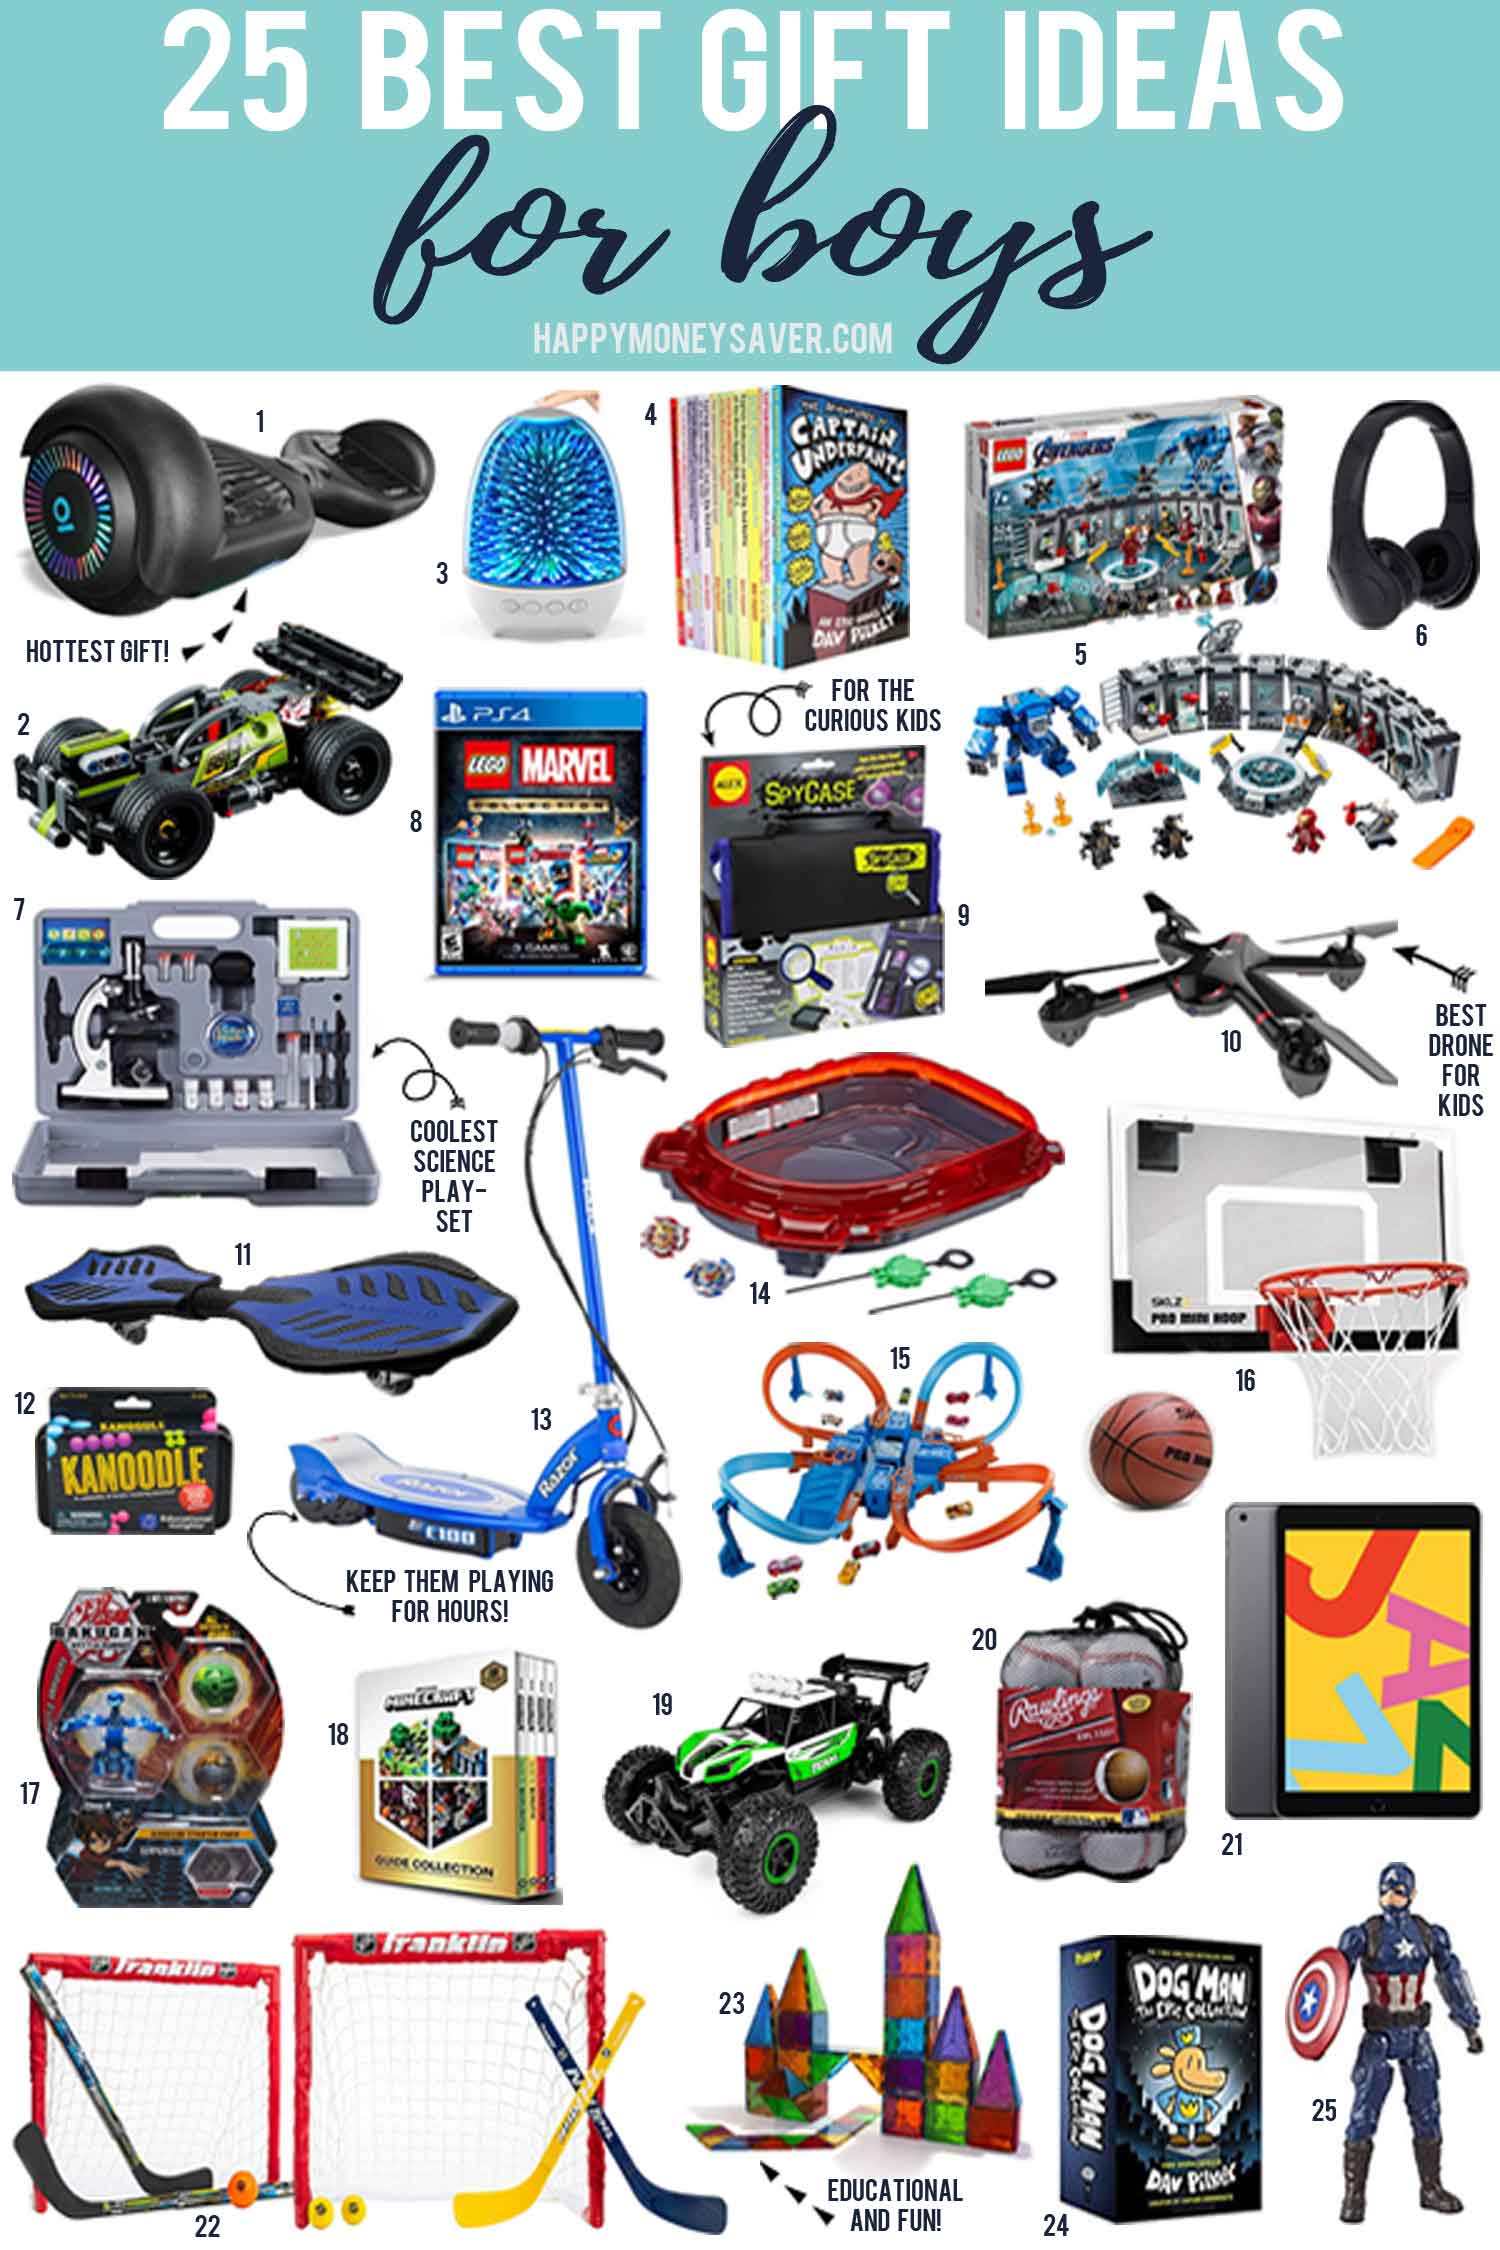 The 25 Best gifts for boys in 2021 with images of all the toys and games